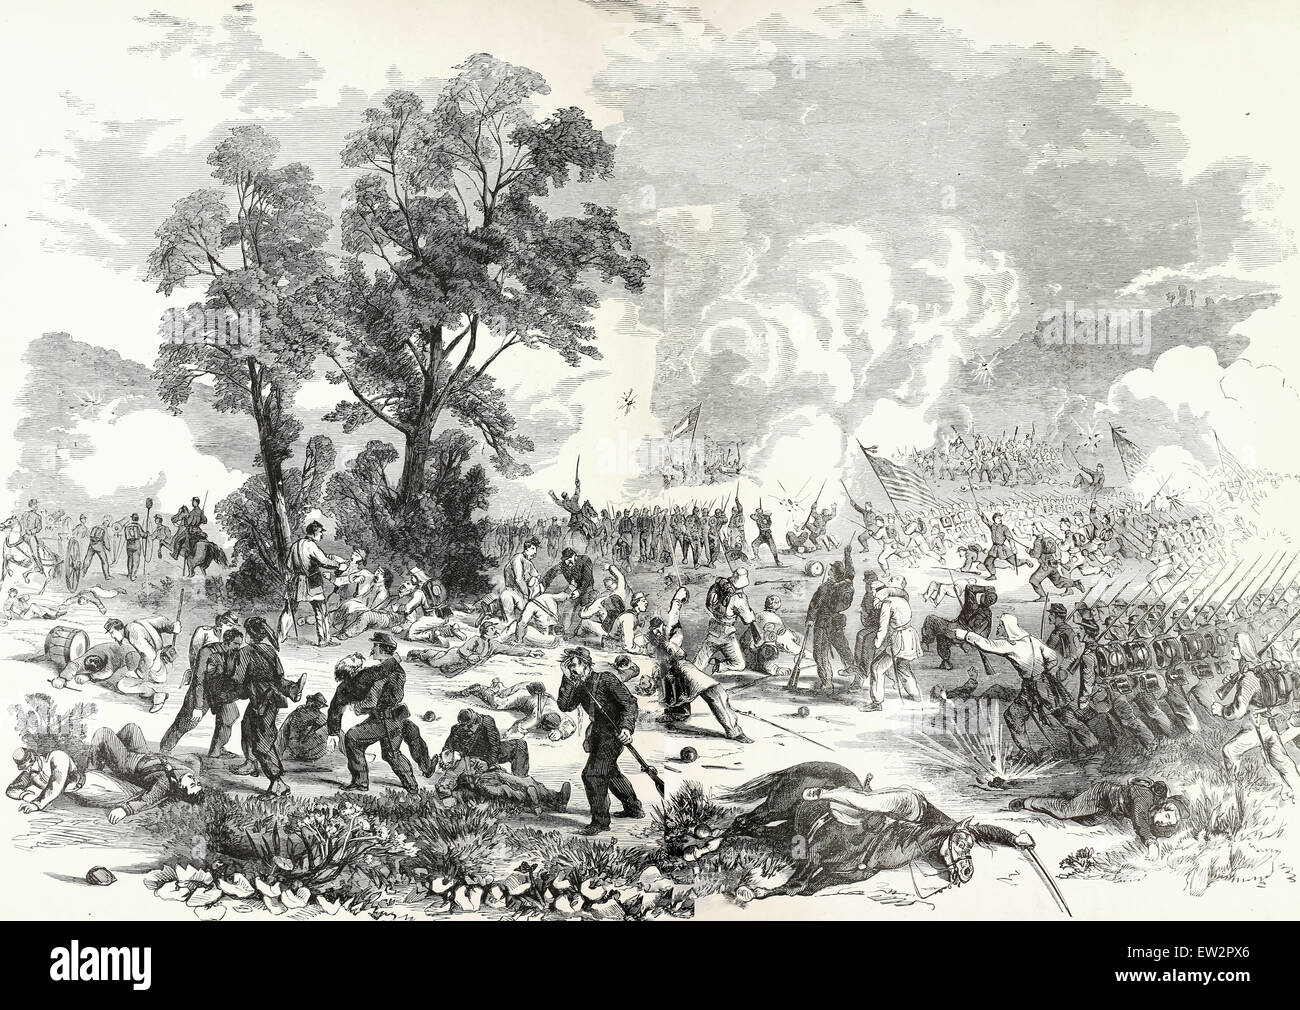 Battle of First Bull Run, Virginia. July 21st, 1861 between the Federal Army commanded by General McDowell and the Confederate Army commanded by Generals Beauregard and Johnston - USA Civil War Stock Photo